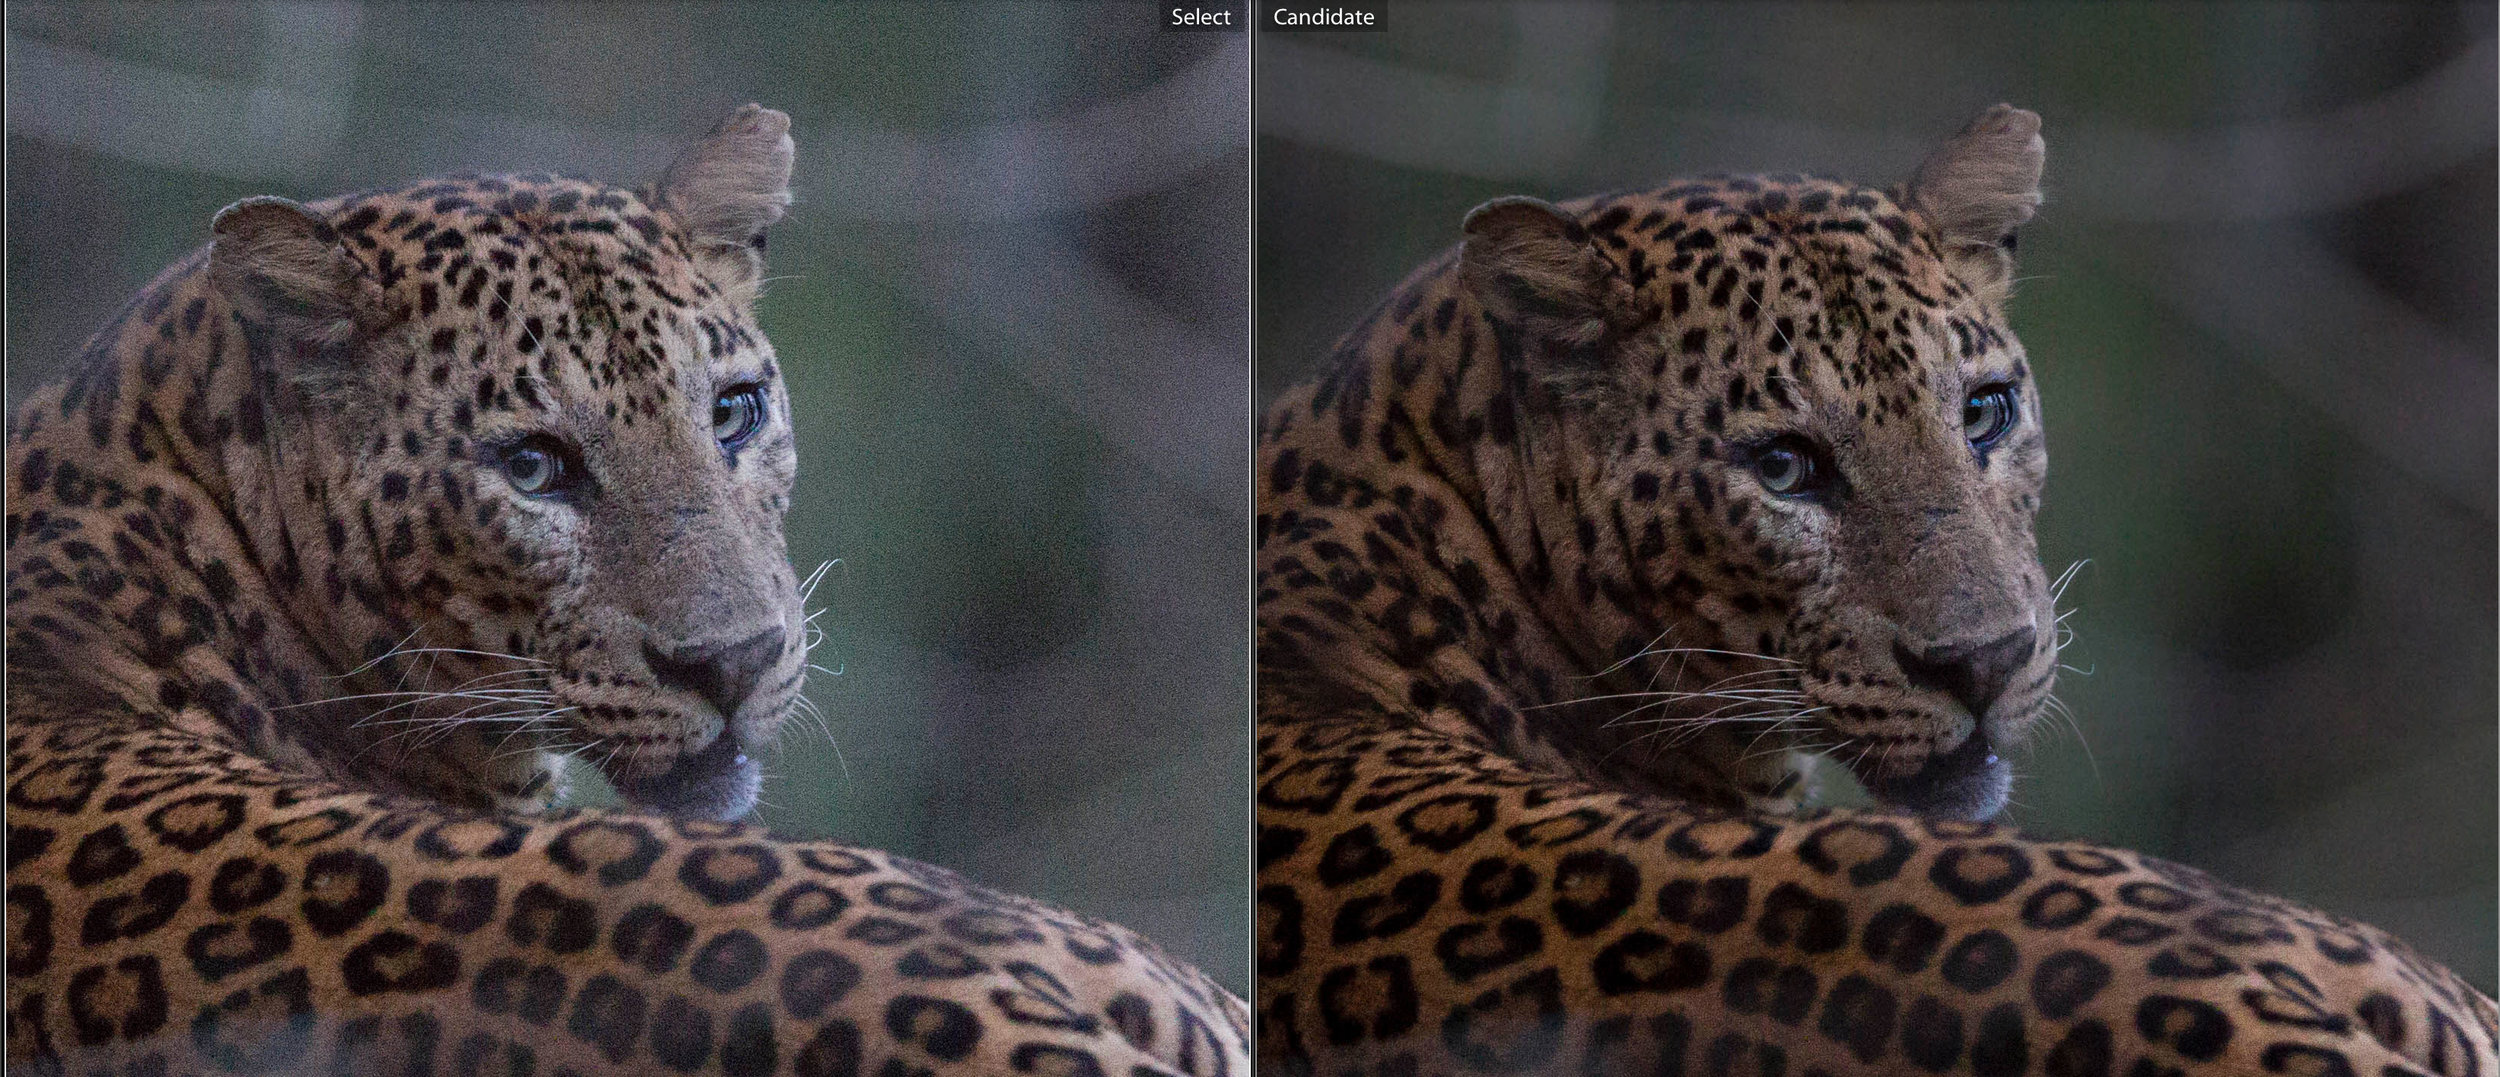  Before (left), and after (right) post-processing 